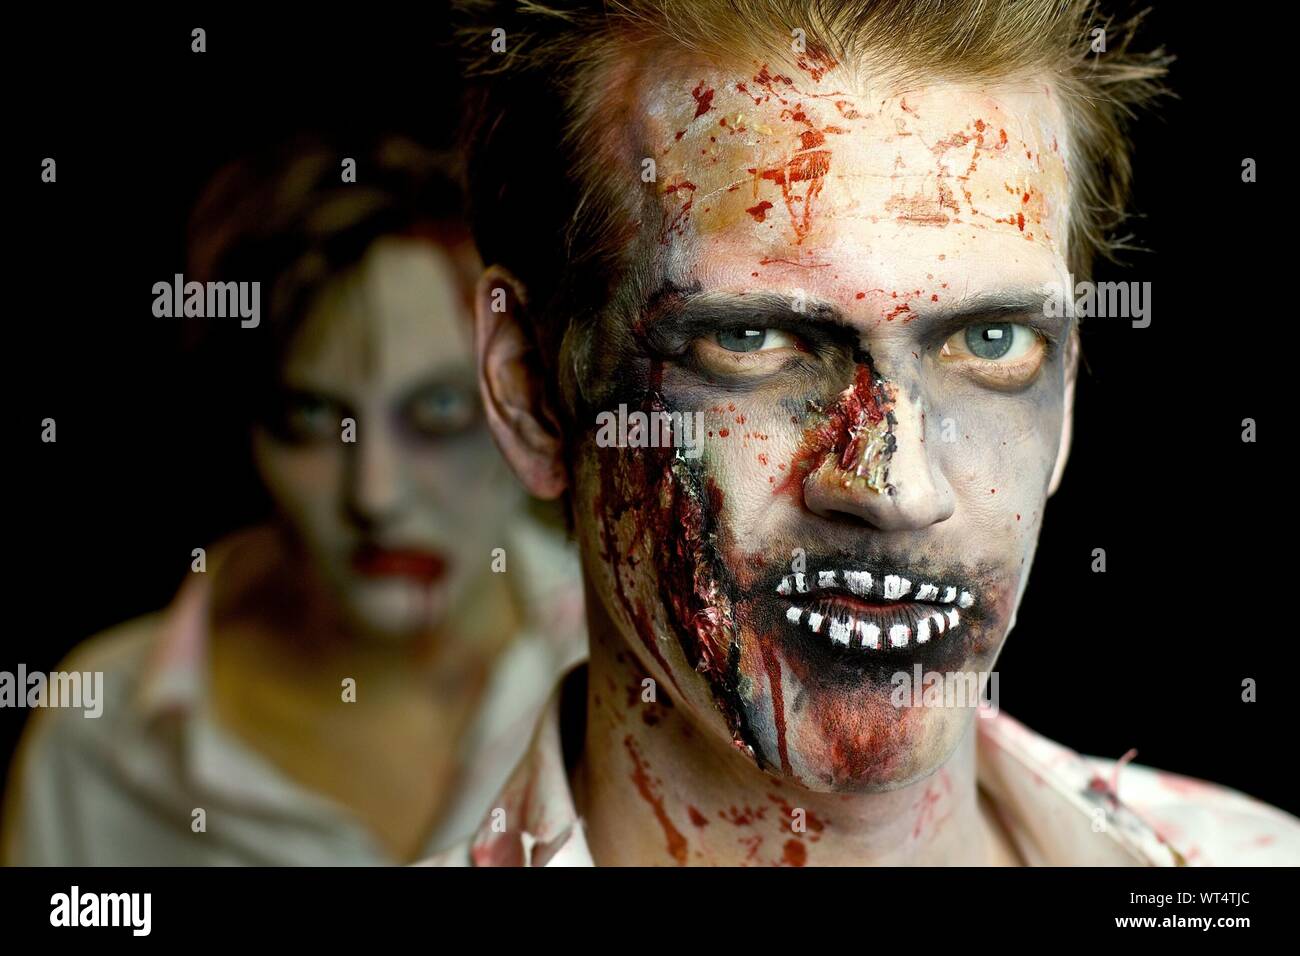 Portrait Of Man In Zombie Make-up During Halloween Stock Photo - Alamy